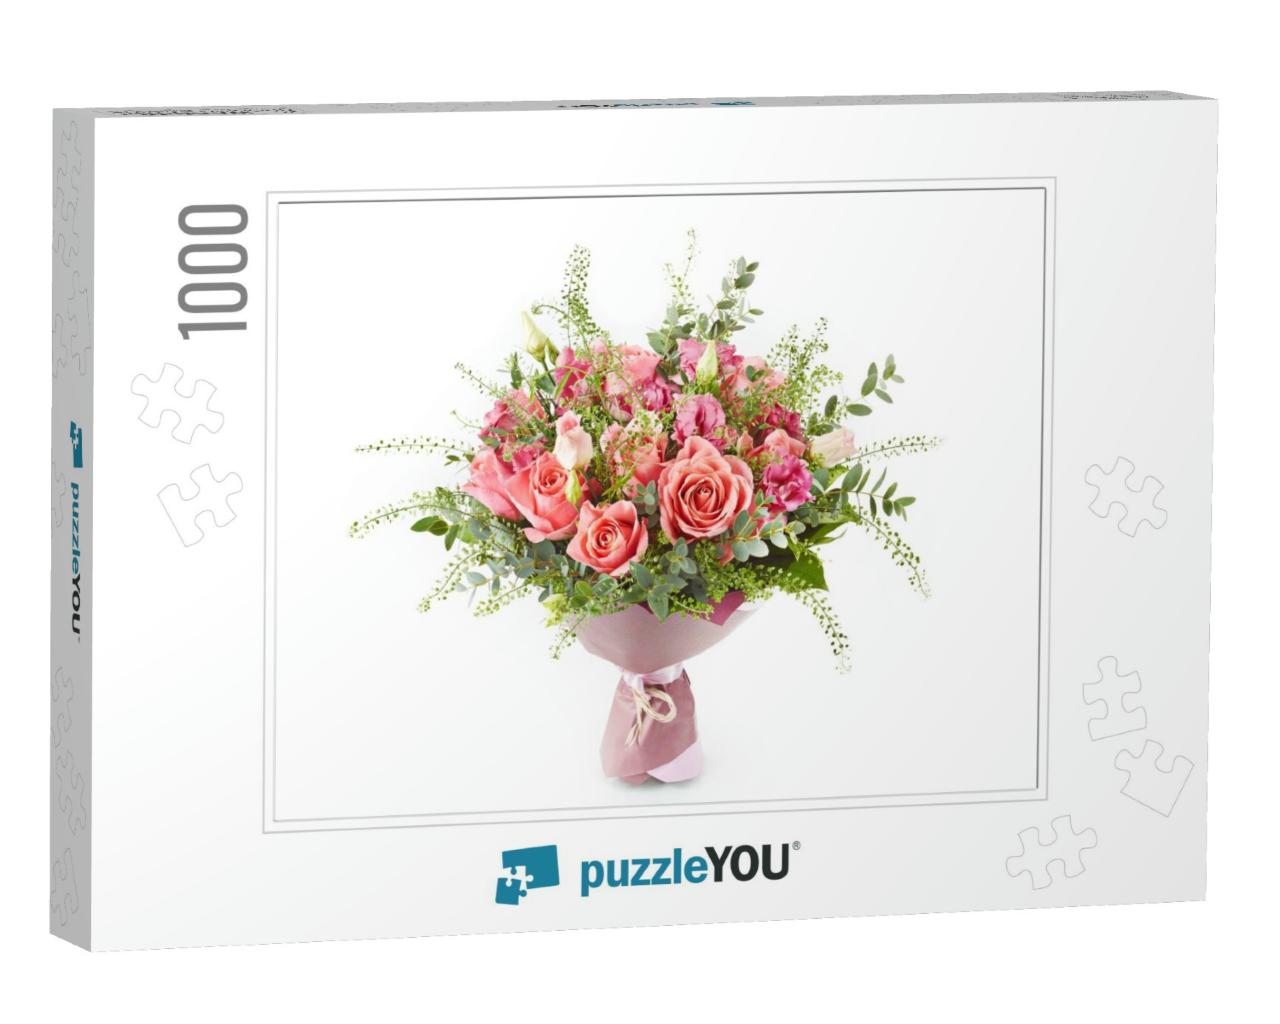 Wedding Bouquet Isolated on White. Fresh, Lush Bouquet of... Jigsaw Puzzle with 1000 pieces